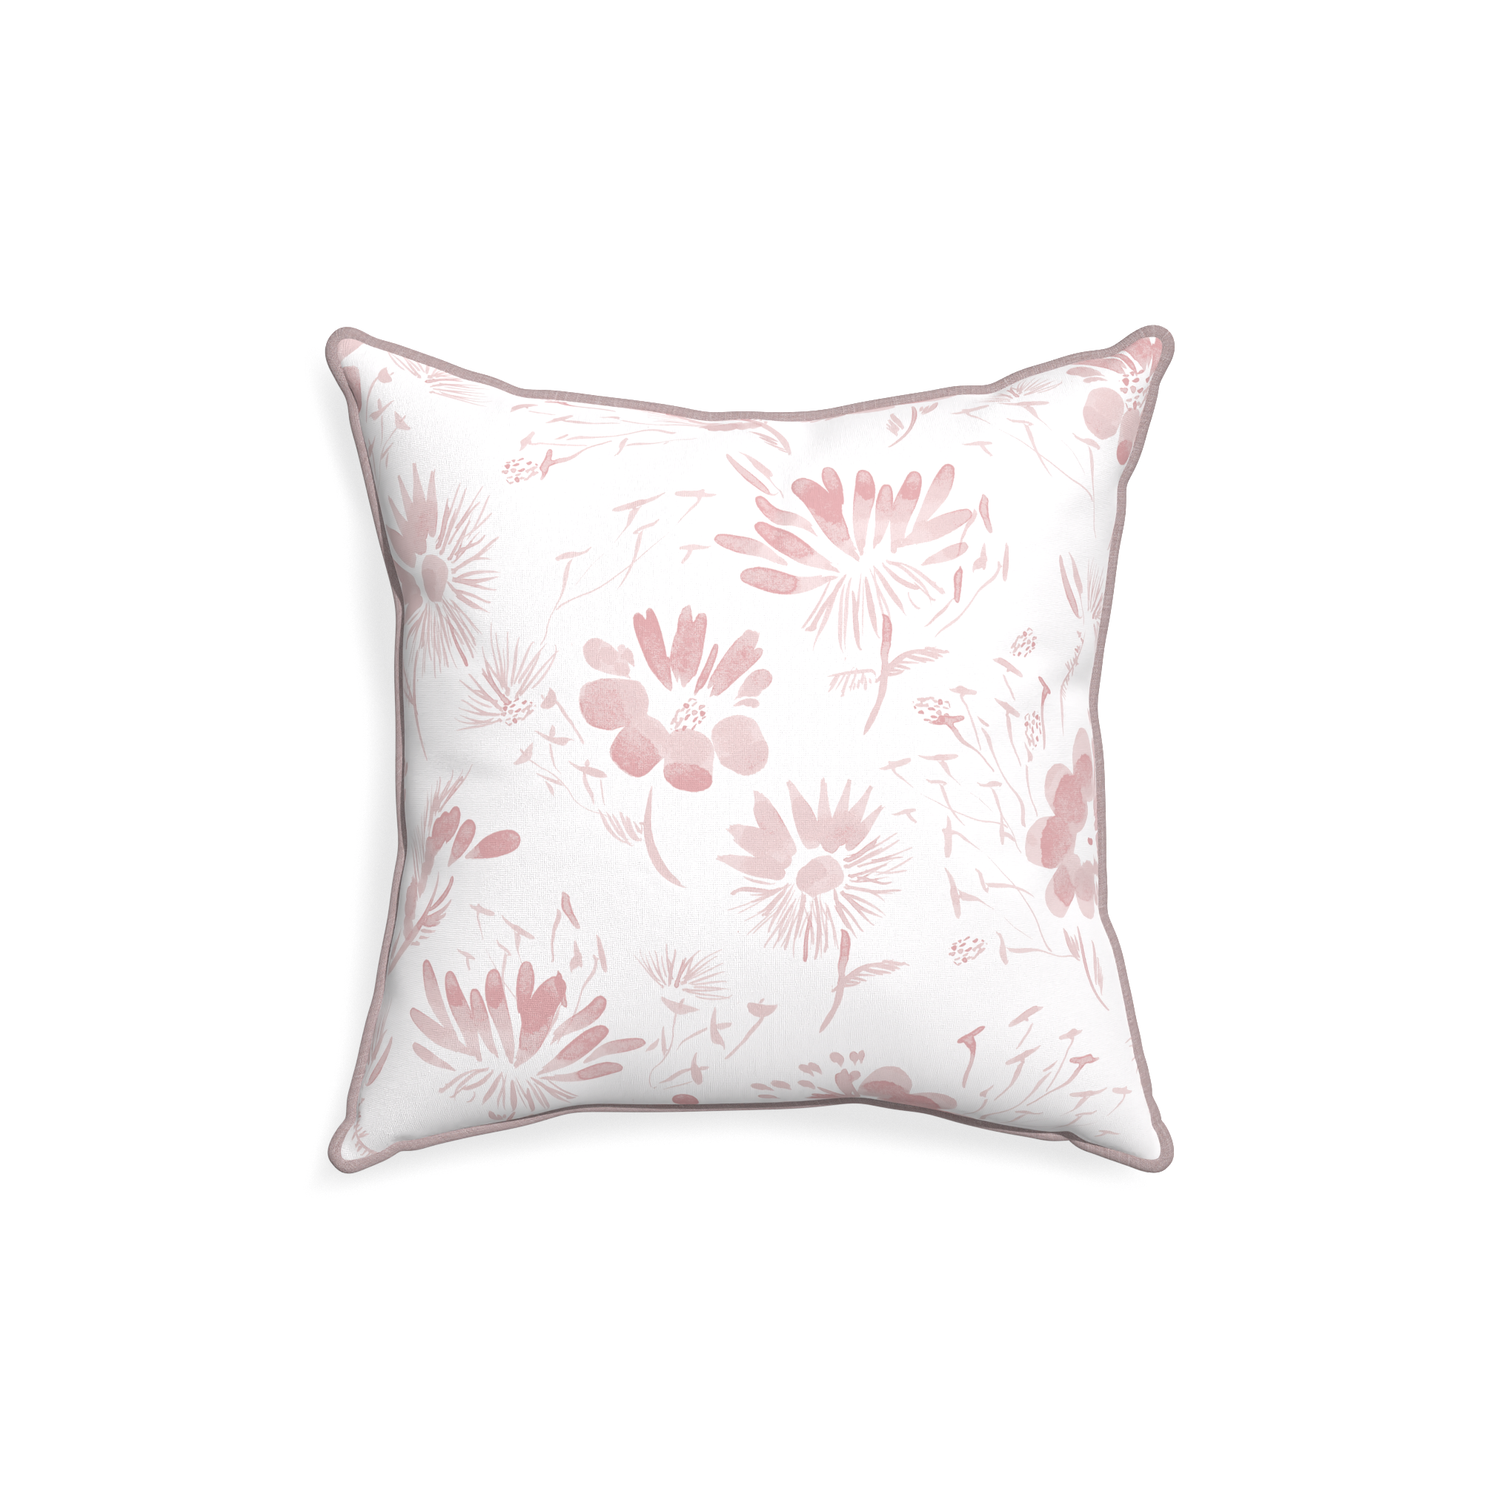 18-square blake custom pink floralpillow with orchid piping on white background